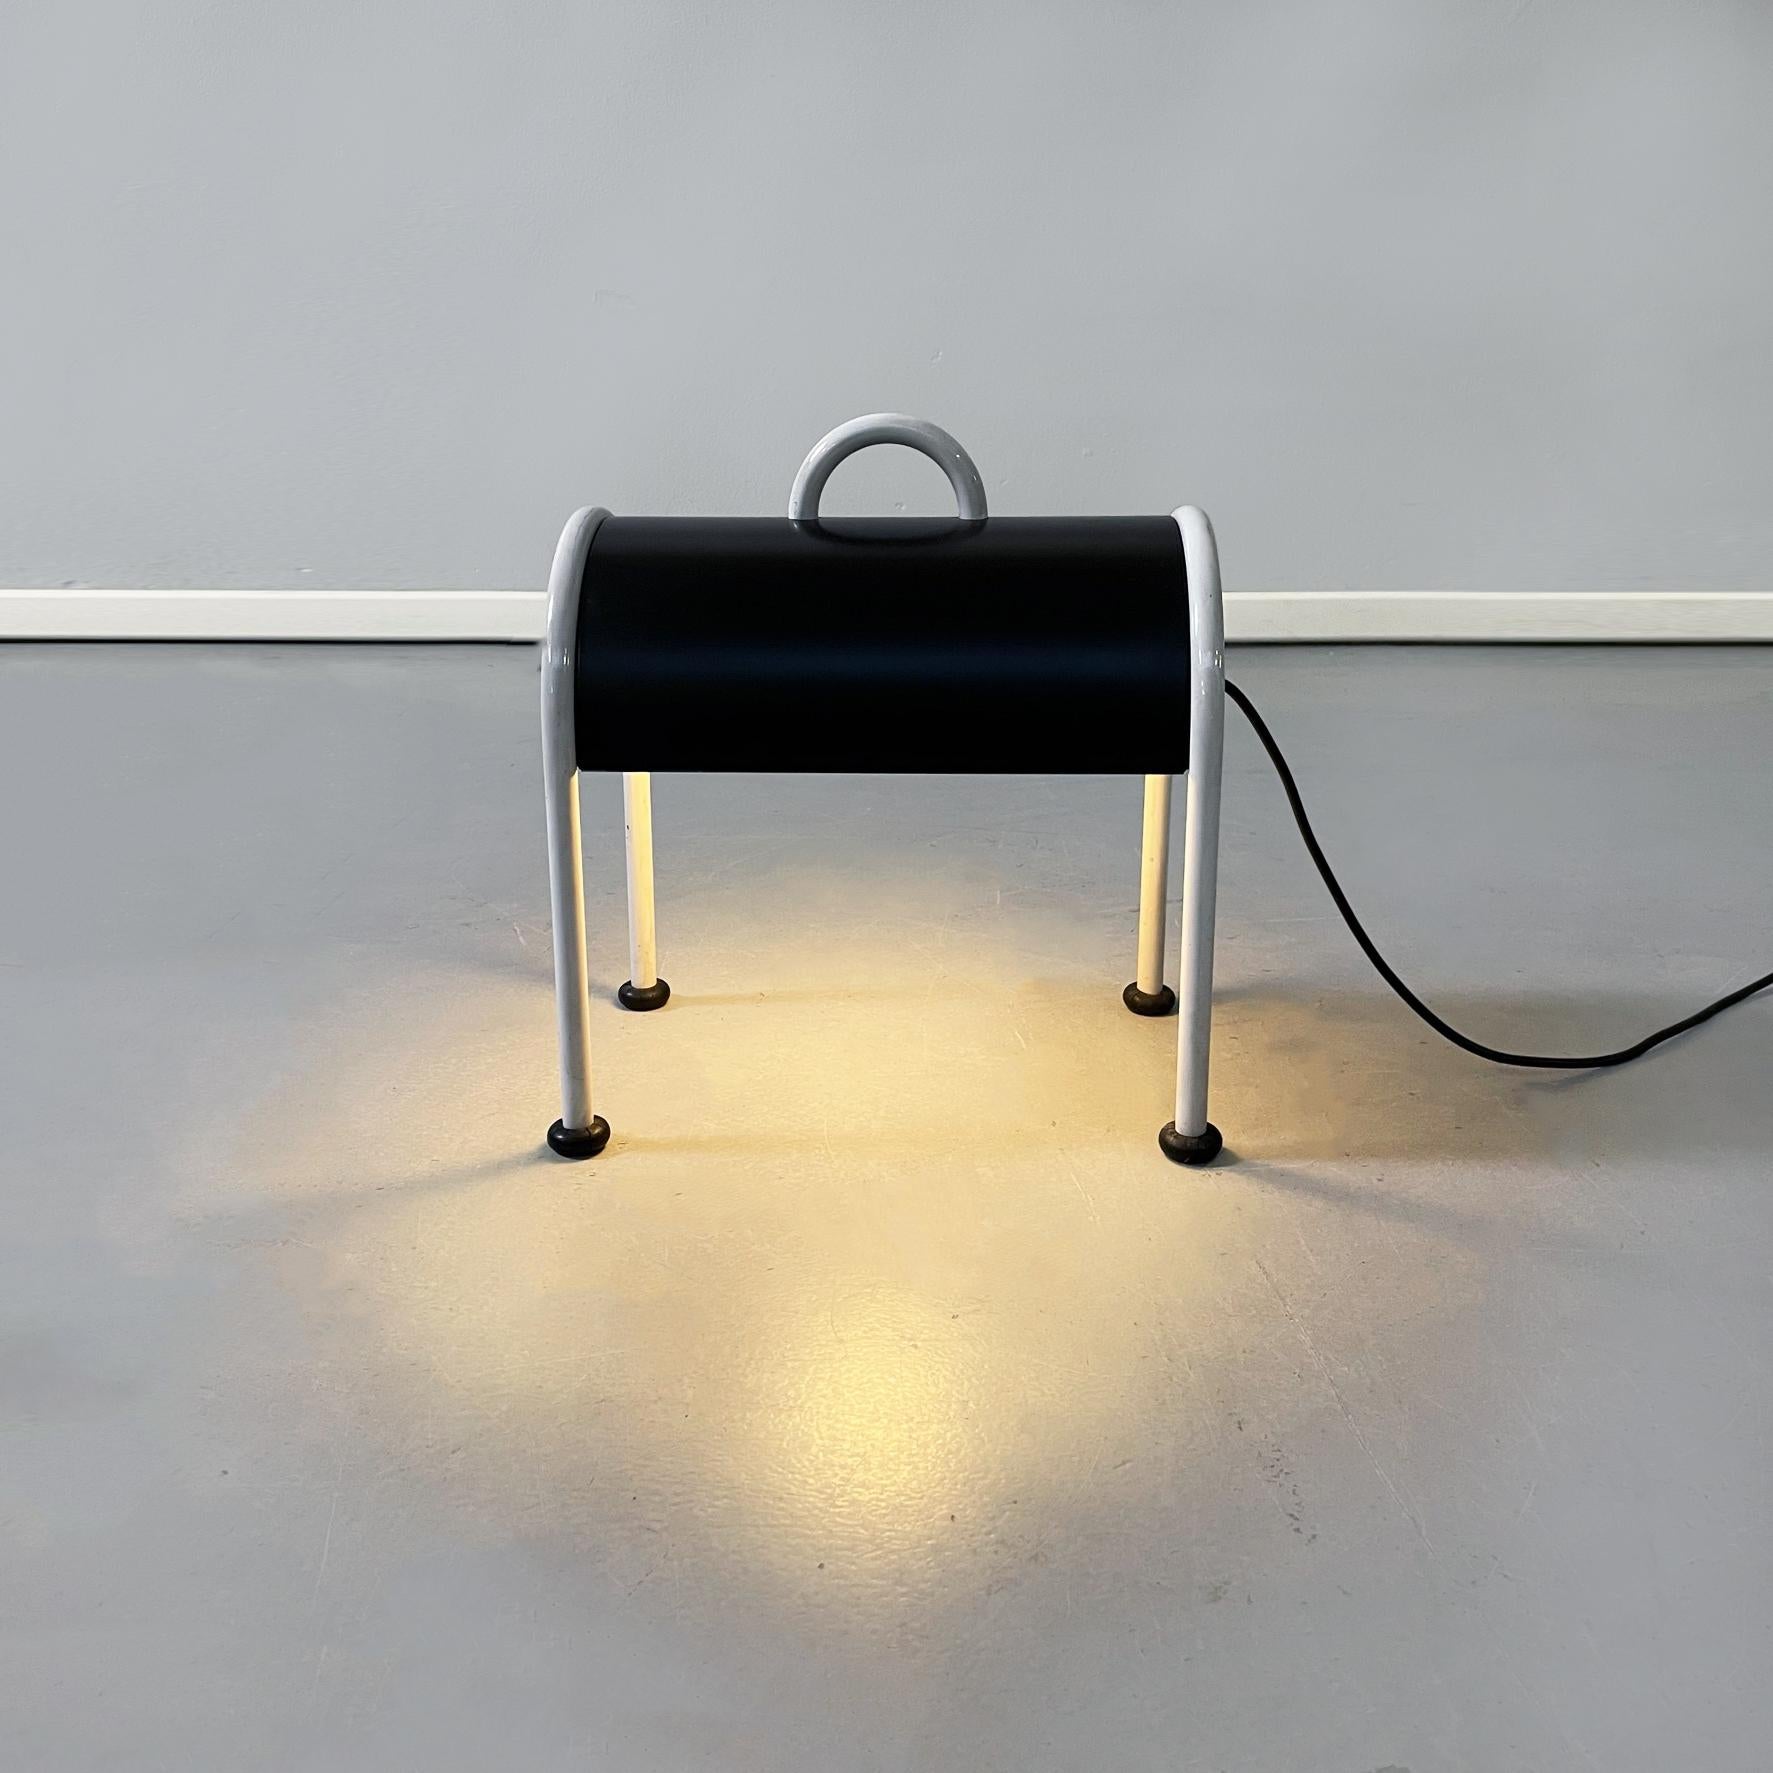 Italian mid-century steel Valigia floor or table lamp by Sottsass for Stilnovo, 1970s
Valigia table or floor lamp with tubular structure in white painted tubular steel. The sheet metal lampshade is bicolor, with opaque black exterior and white